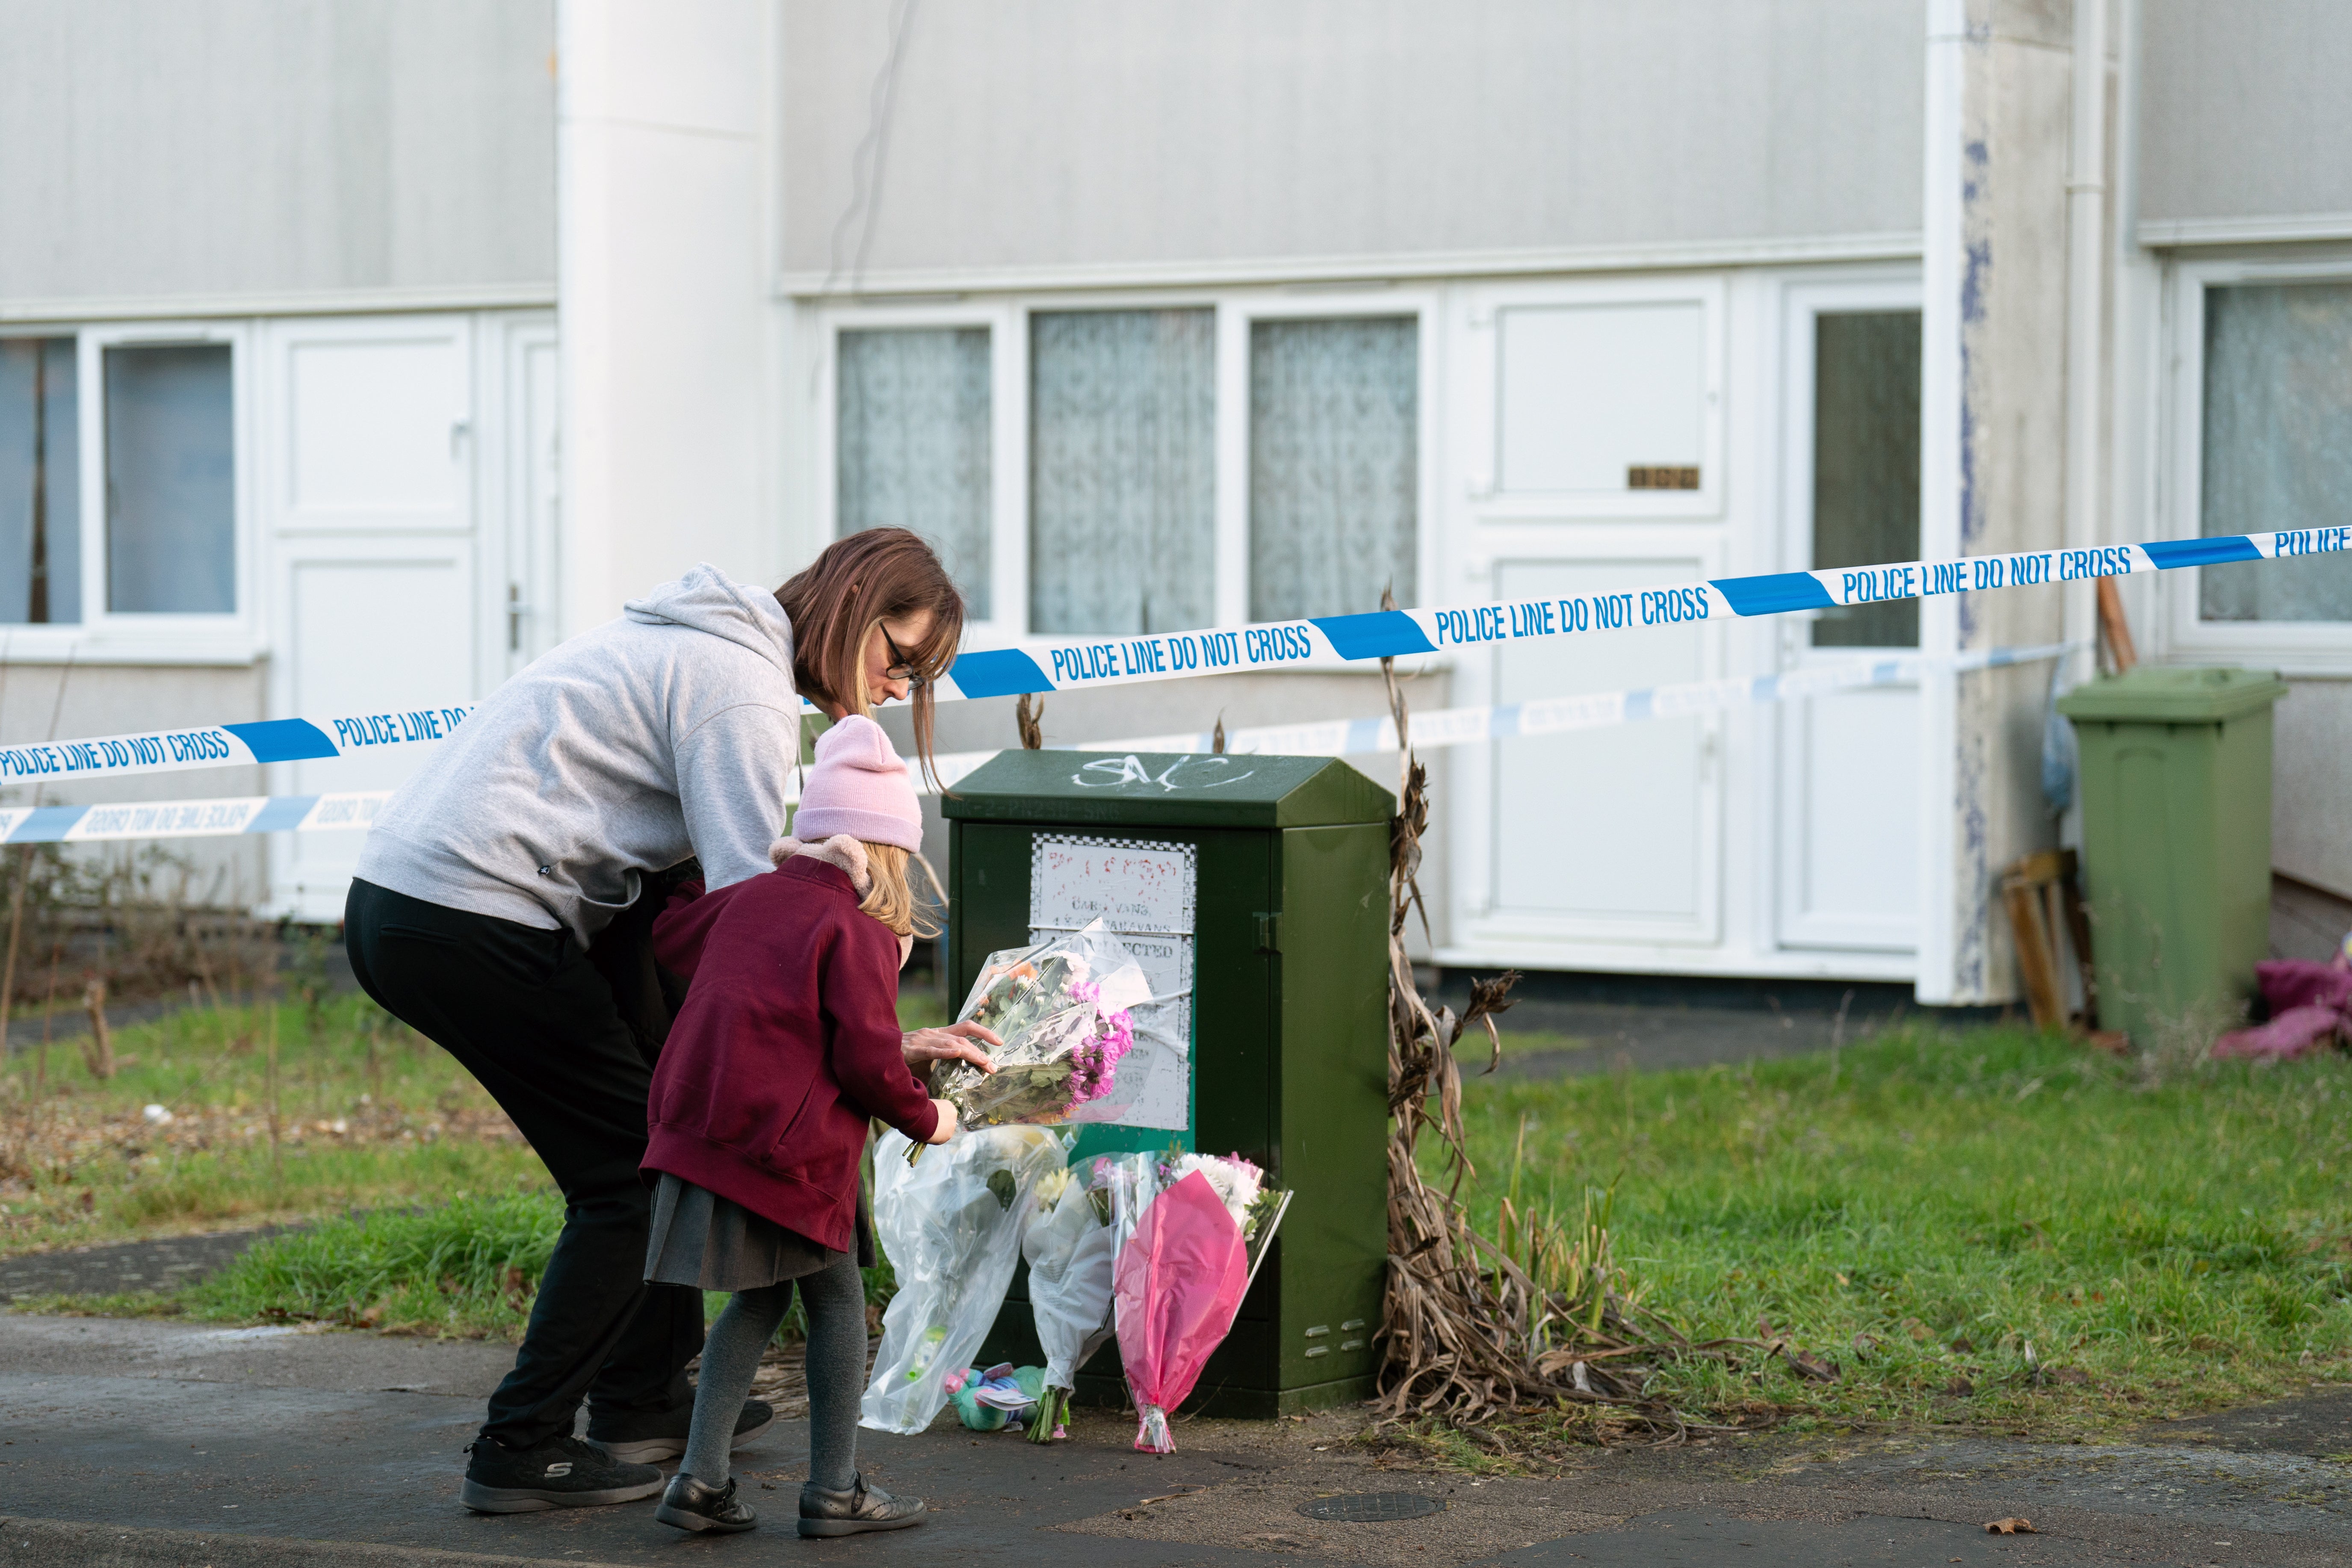 A woman and child arrive to leave flowers at the scene on Broadlands, Netherfield, Milton Keynes, Buckinghamshire